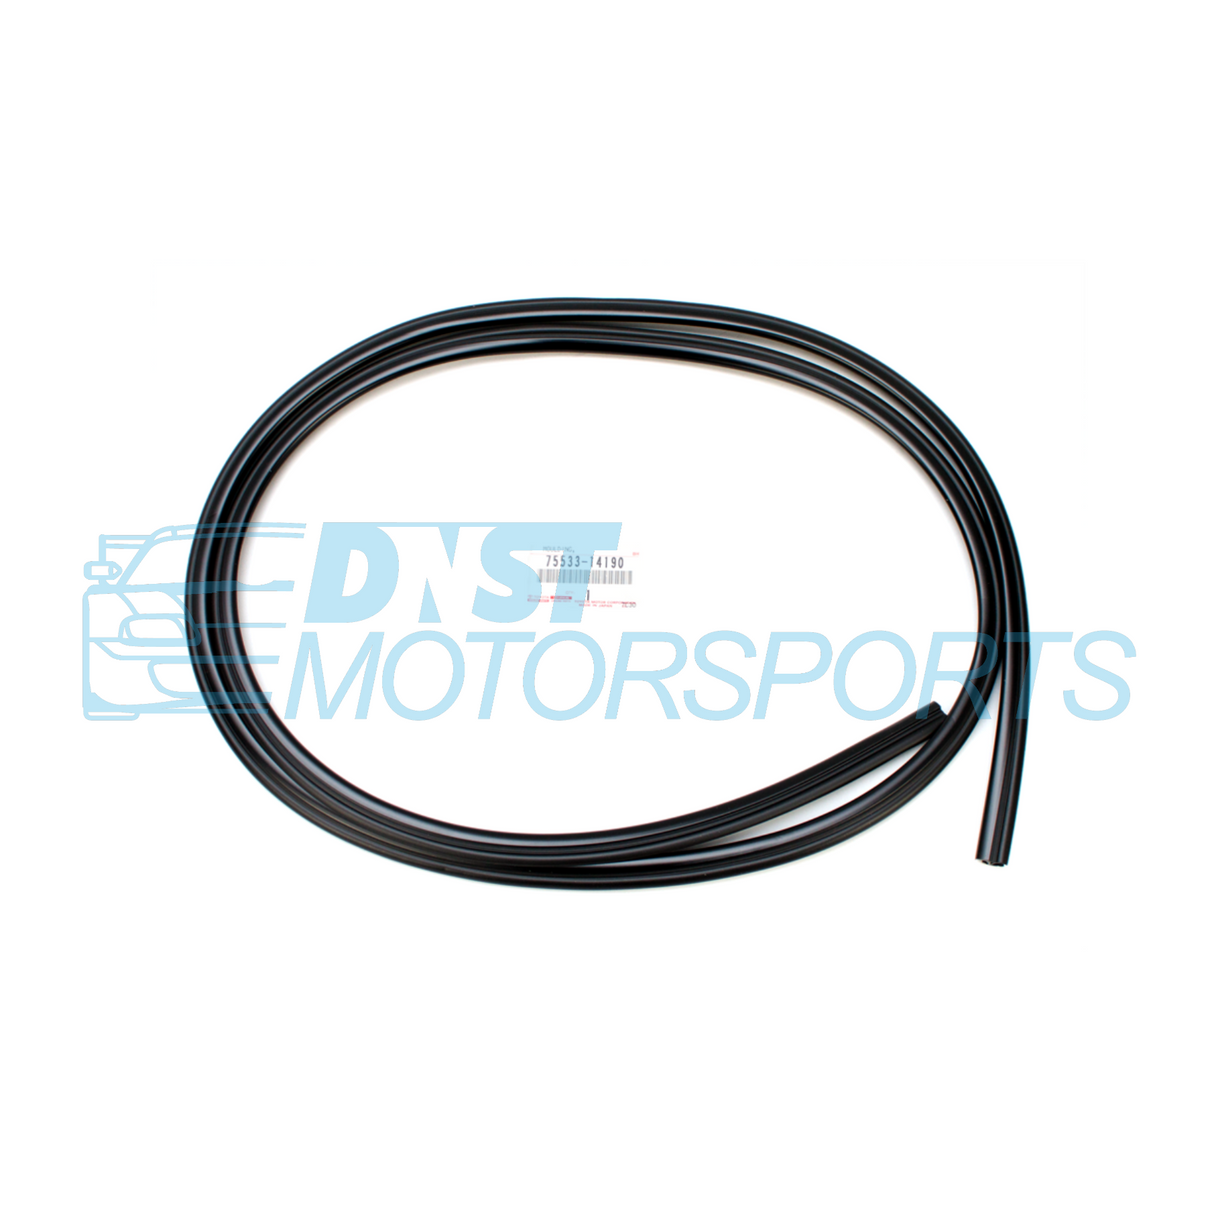 Rubber seal for a front window on white background with DNST Motorsports watermark